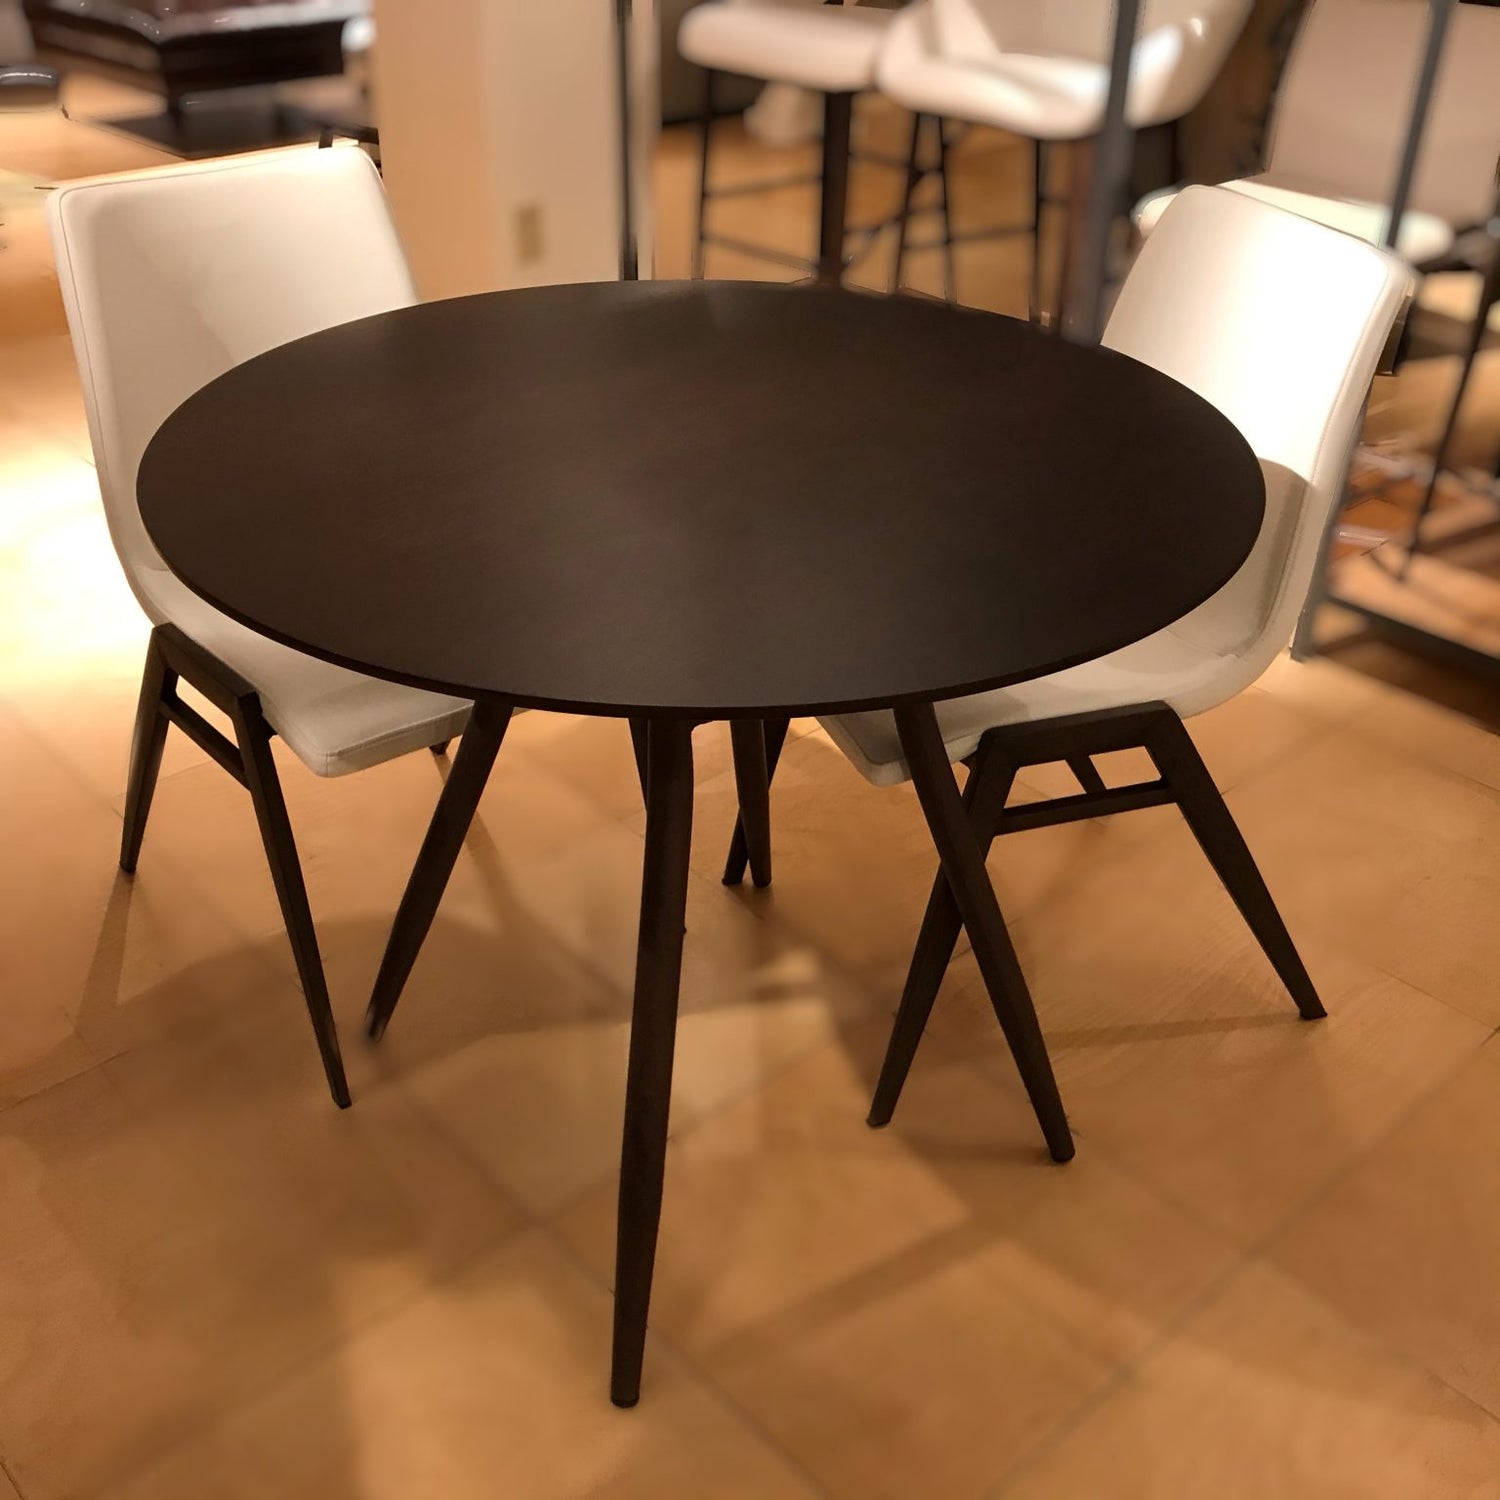 CARIBOU 36″ ROUND TABLE